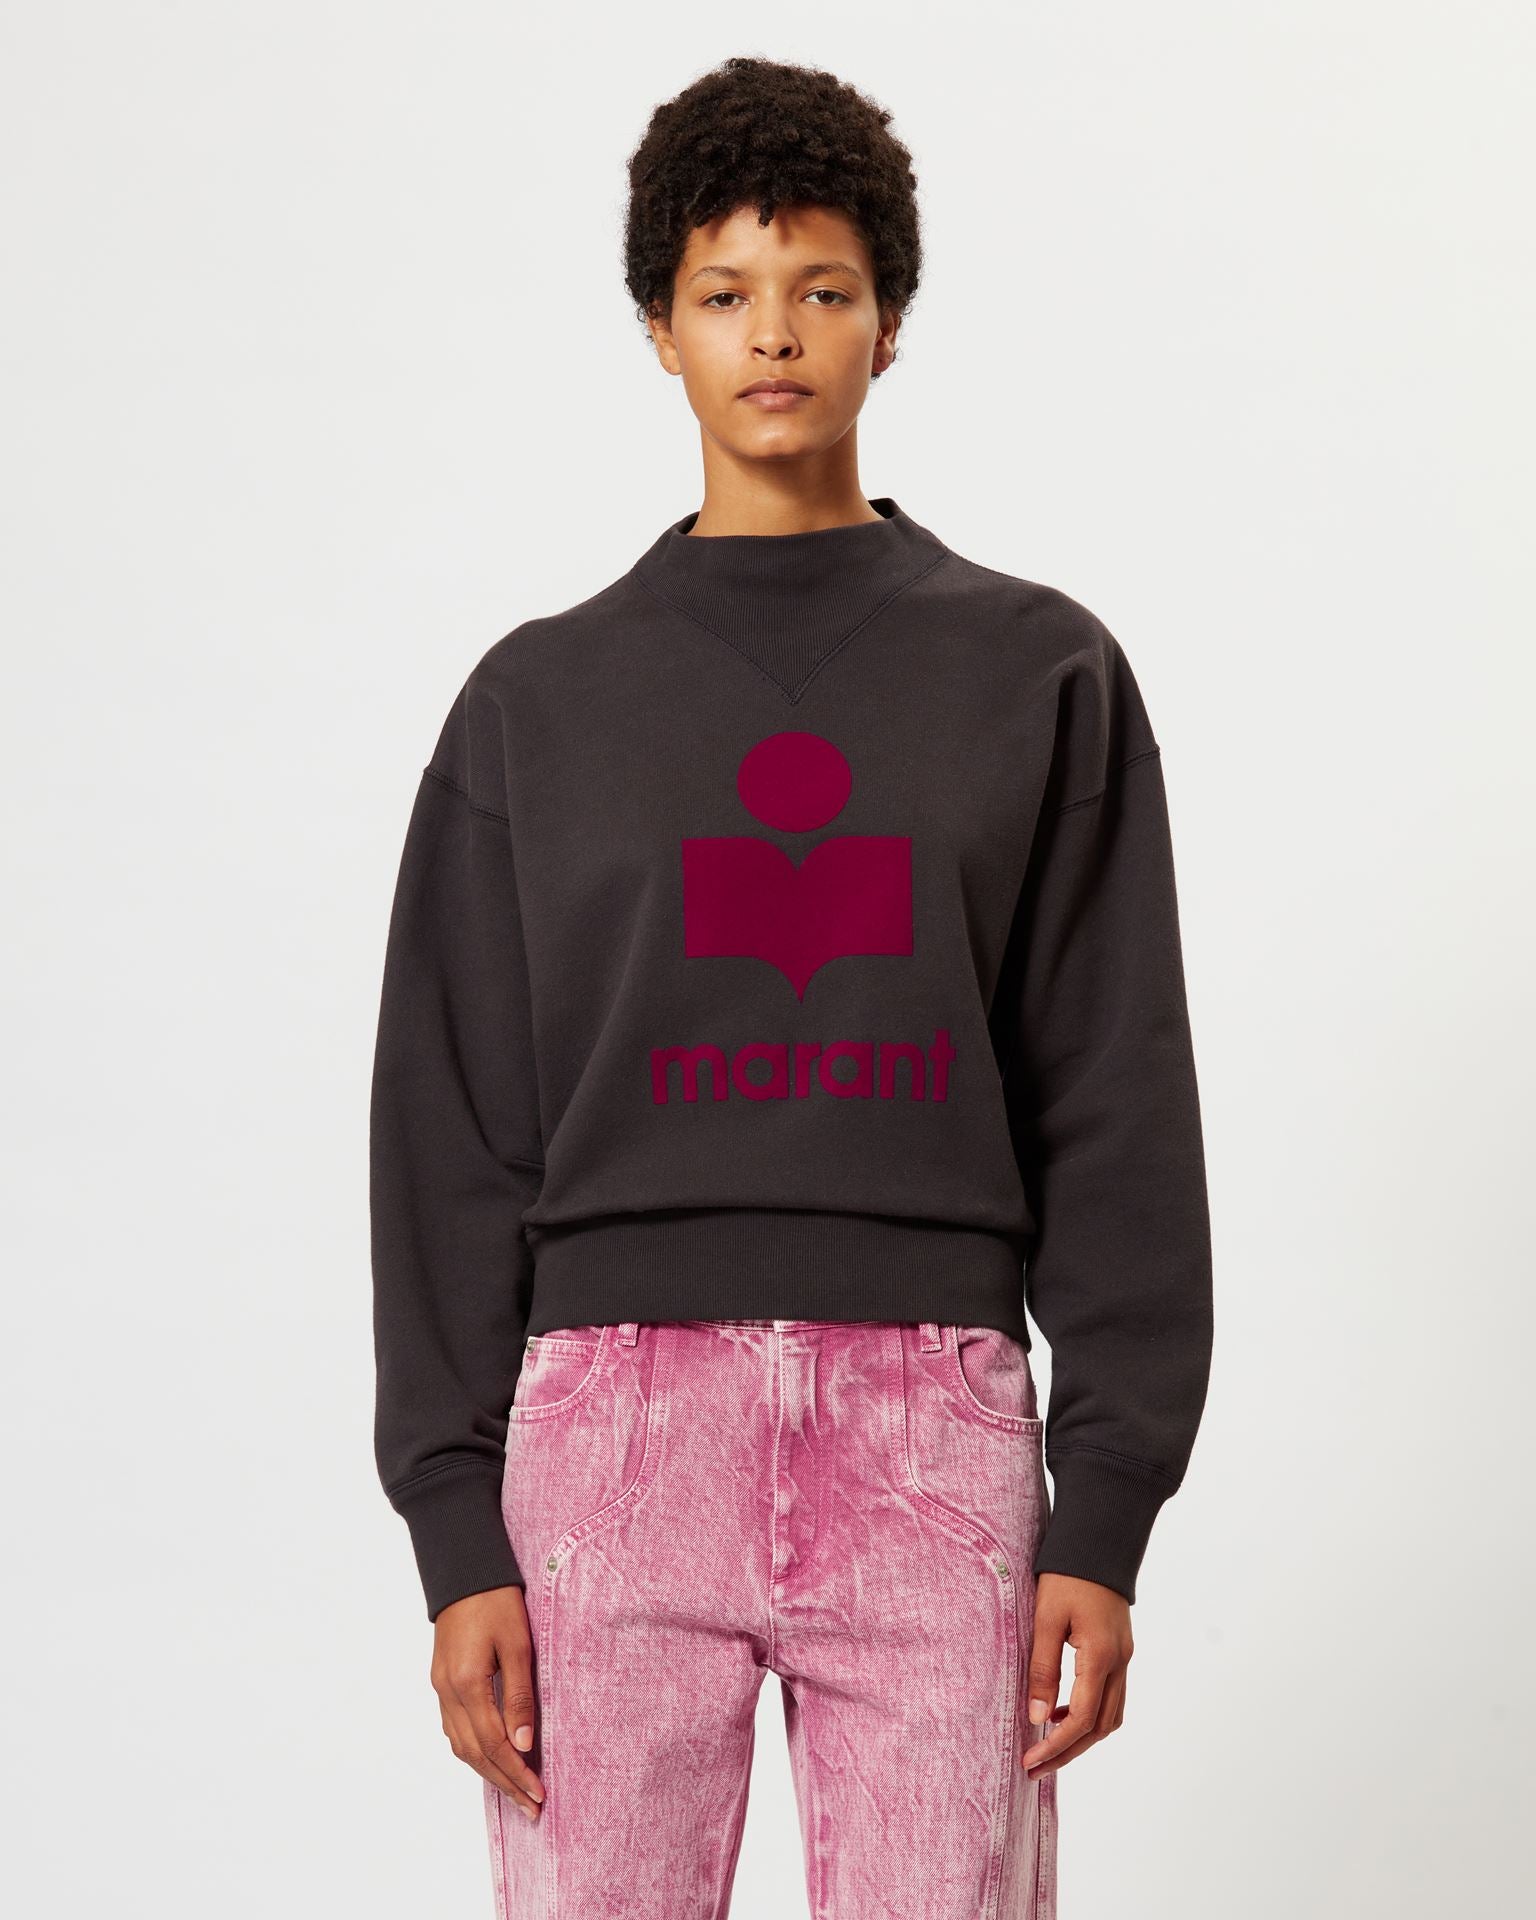 The Isabel Marant Moby Sweatshirt in Faded Night Fuchsia available at The New Trend Australia